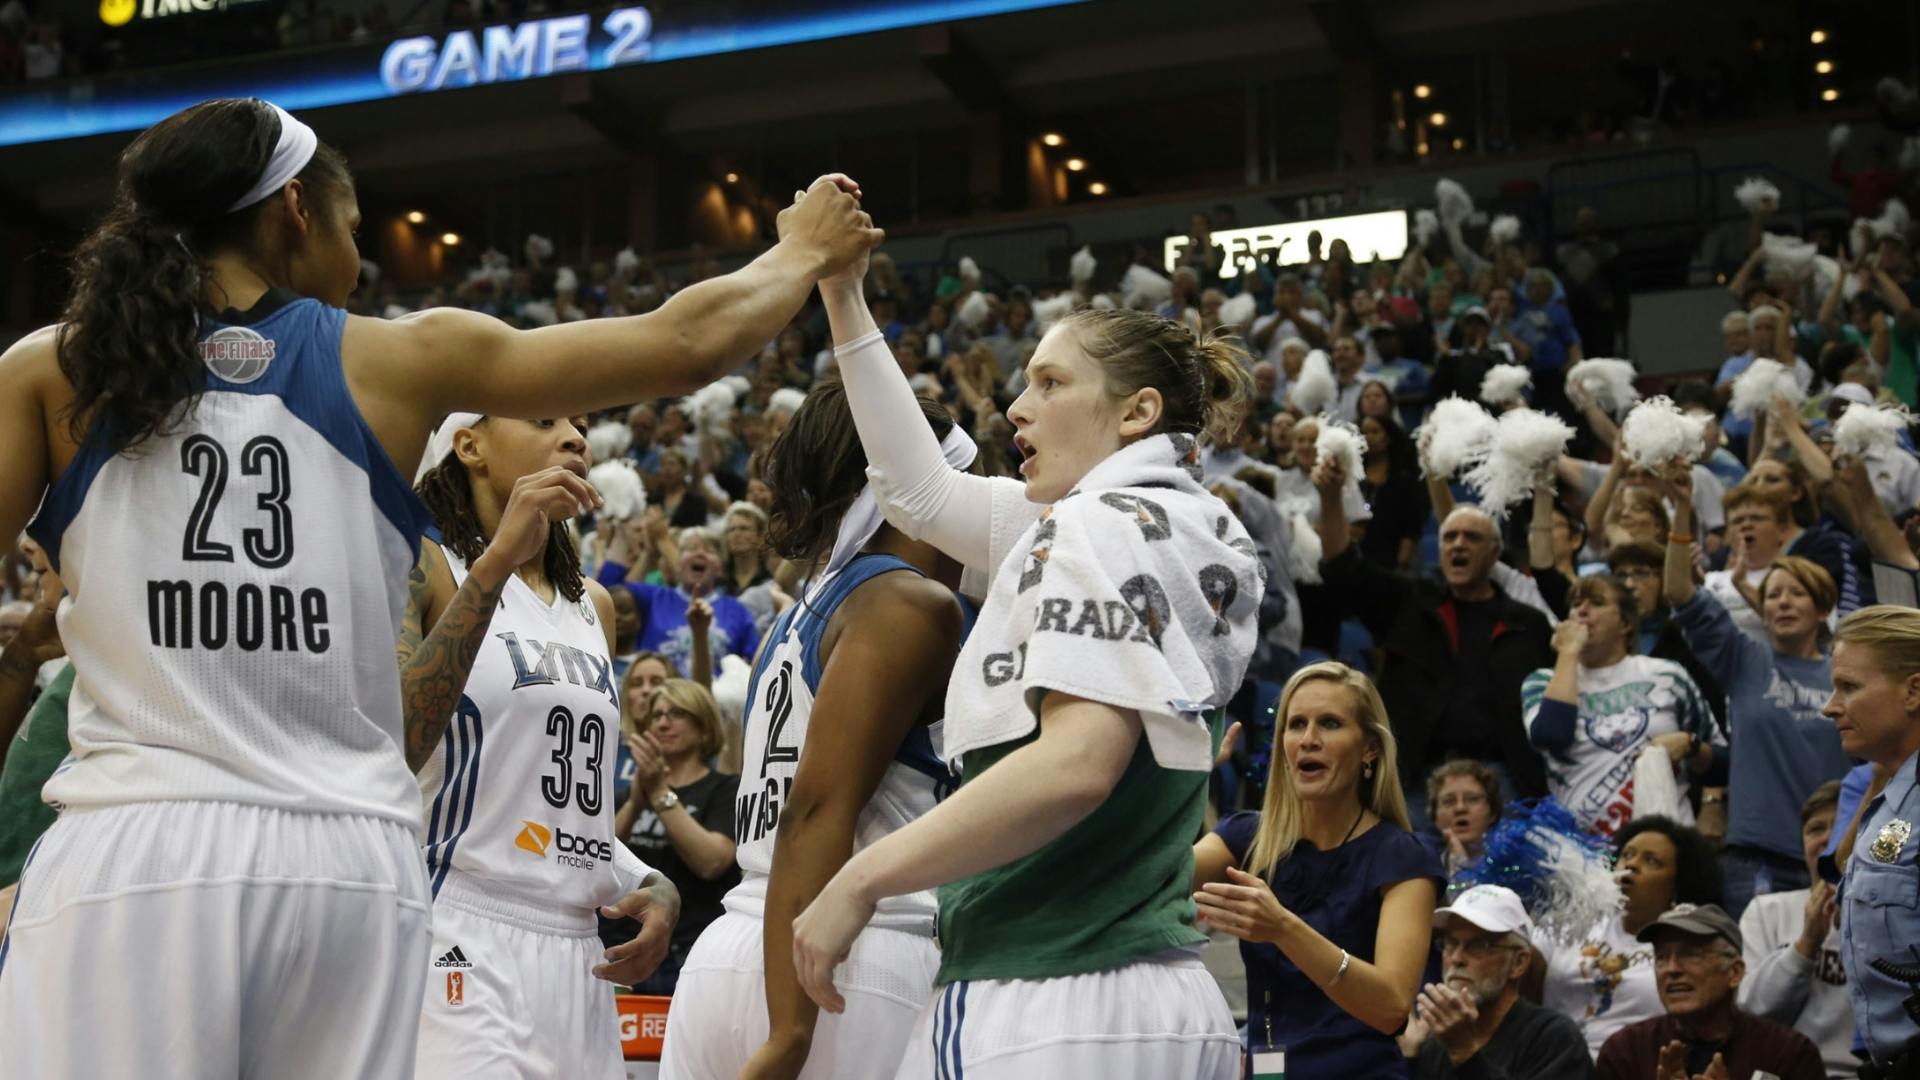 The Lynx have a 2-0 lead in the WNBA Finals, one victory away from its second title in three seasons.